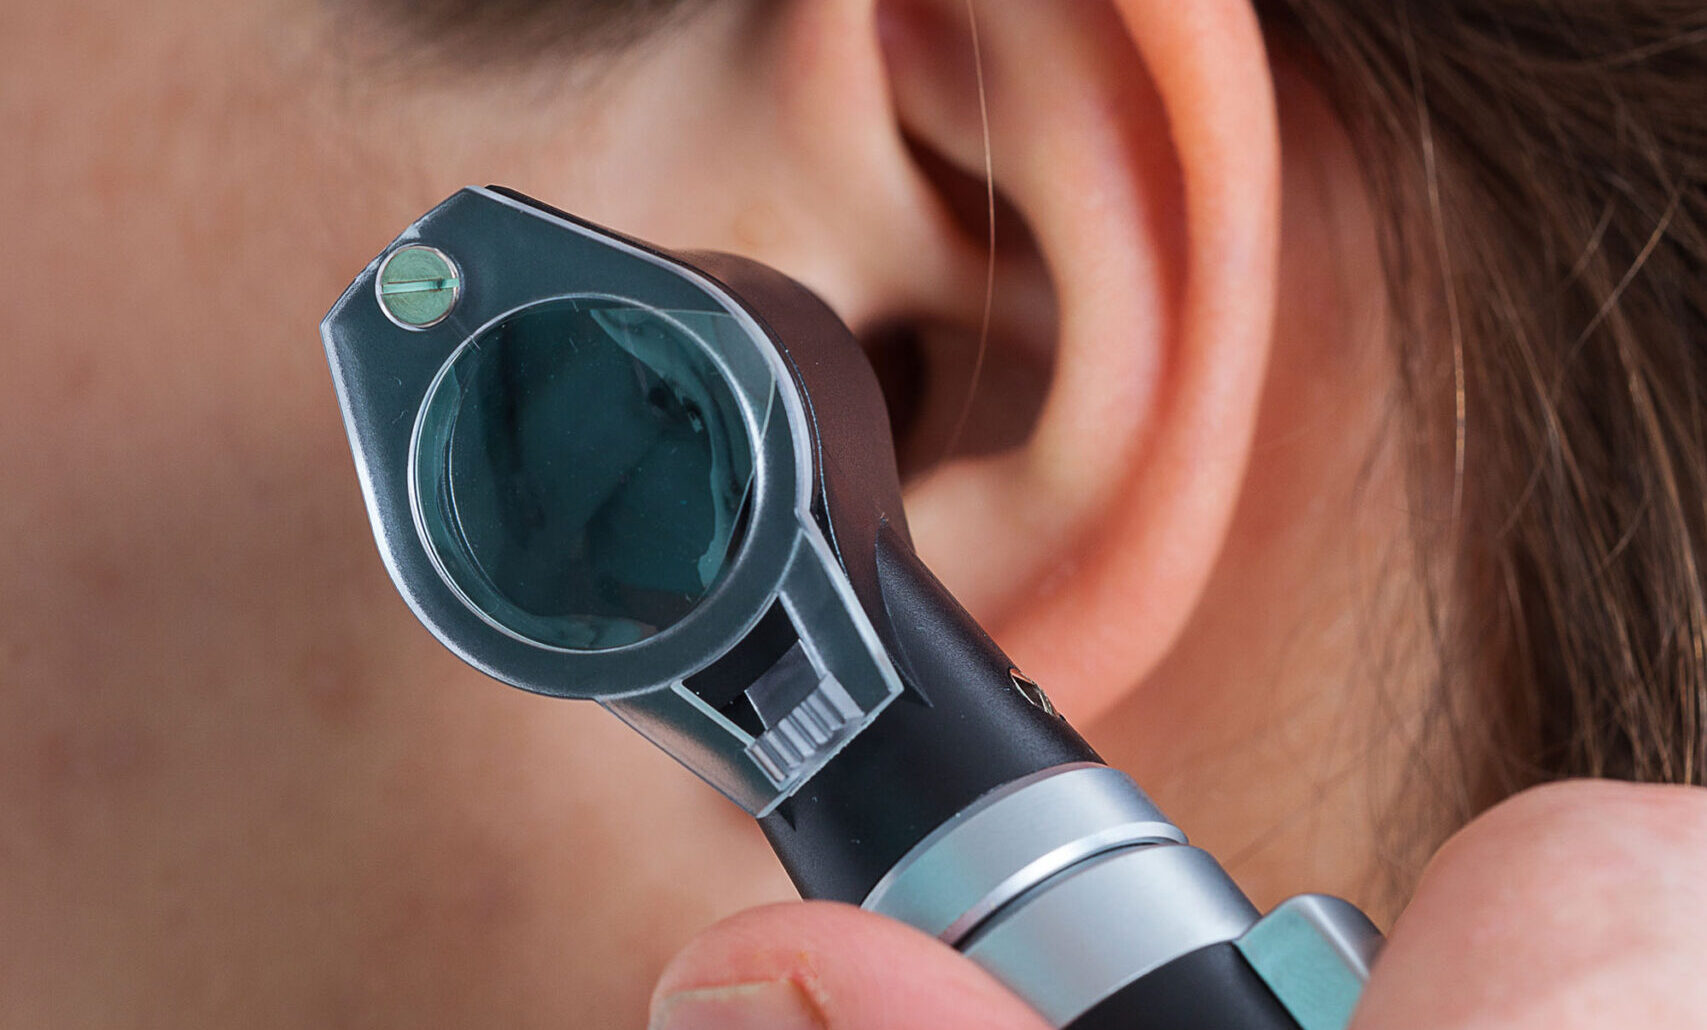 Ear examining with an otoscope, close up